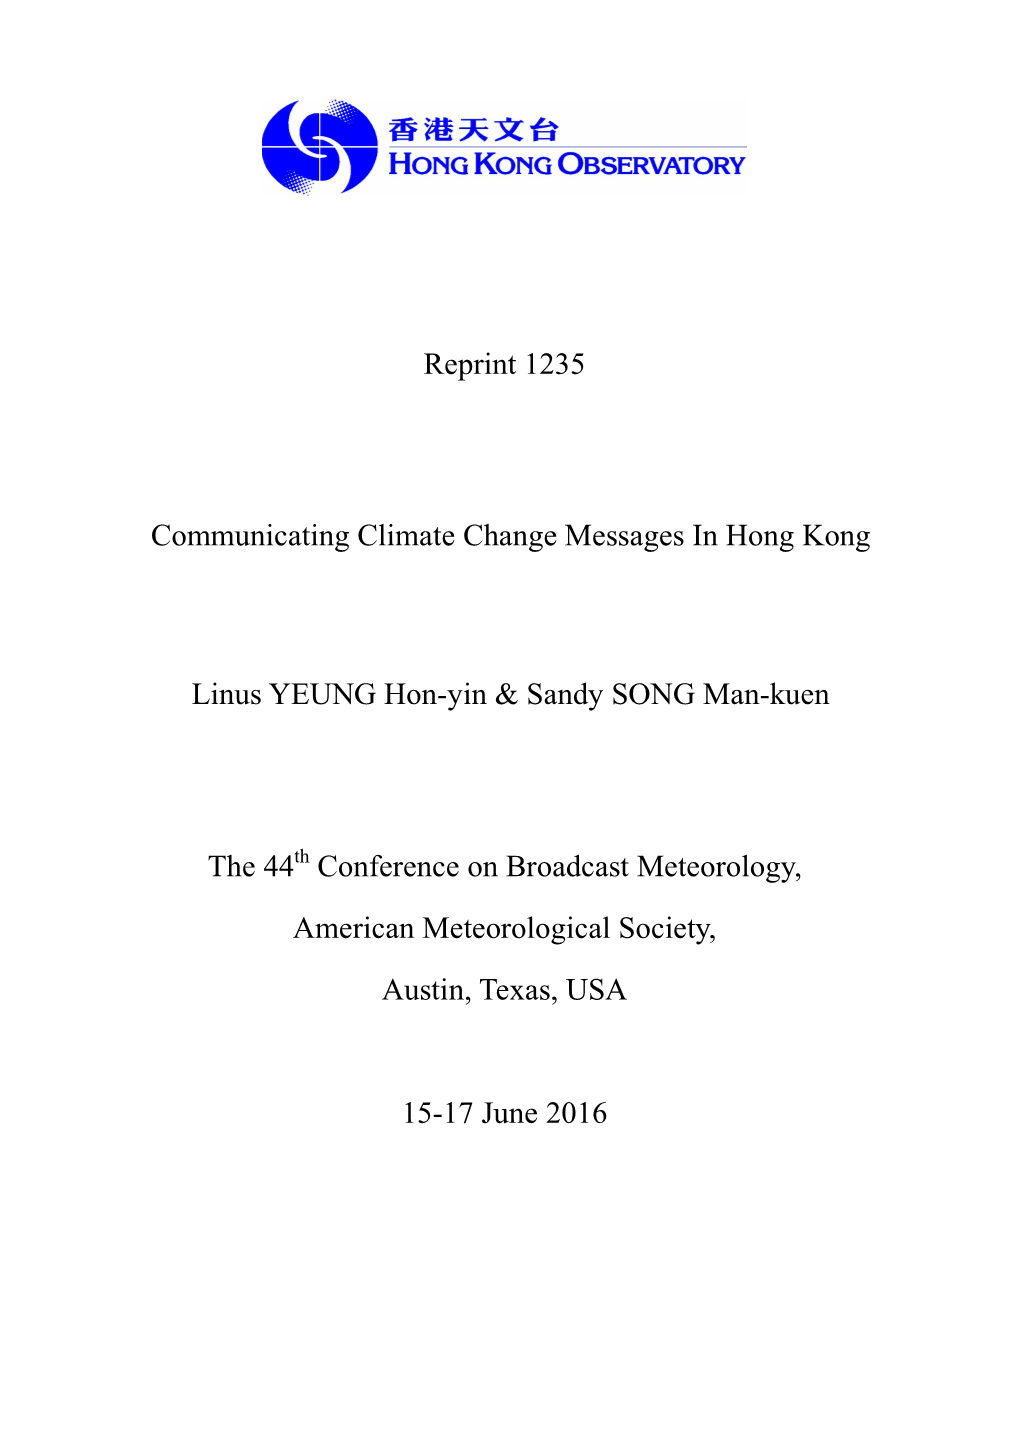 Reprint 1235 Communicating Climate Change Messages in Hong Kong Linus YEUNG Hon-Yin & Sandy SONG Man-Nuen the 44Th Confere